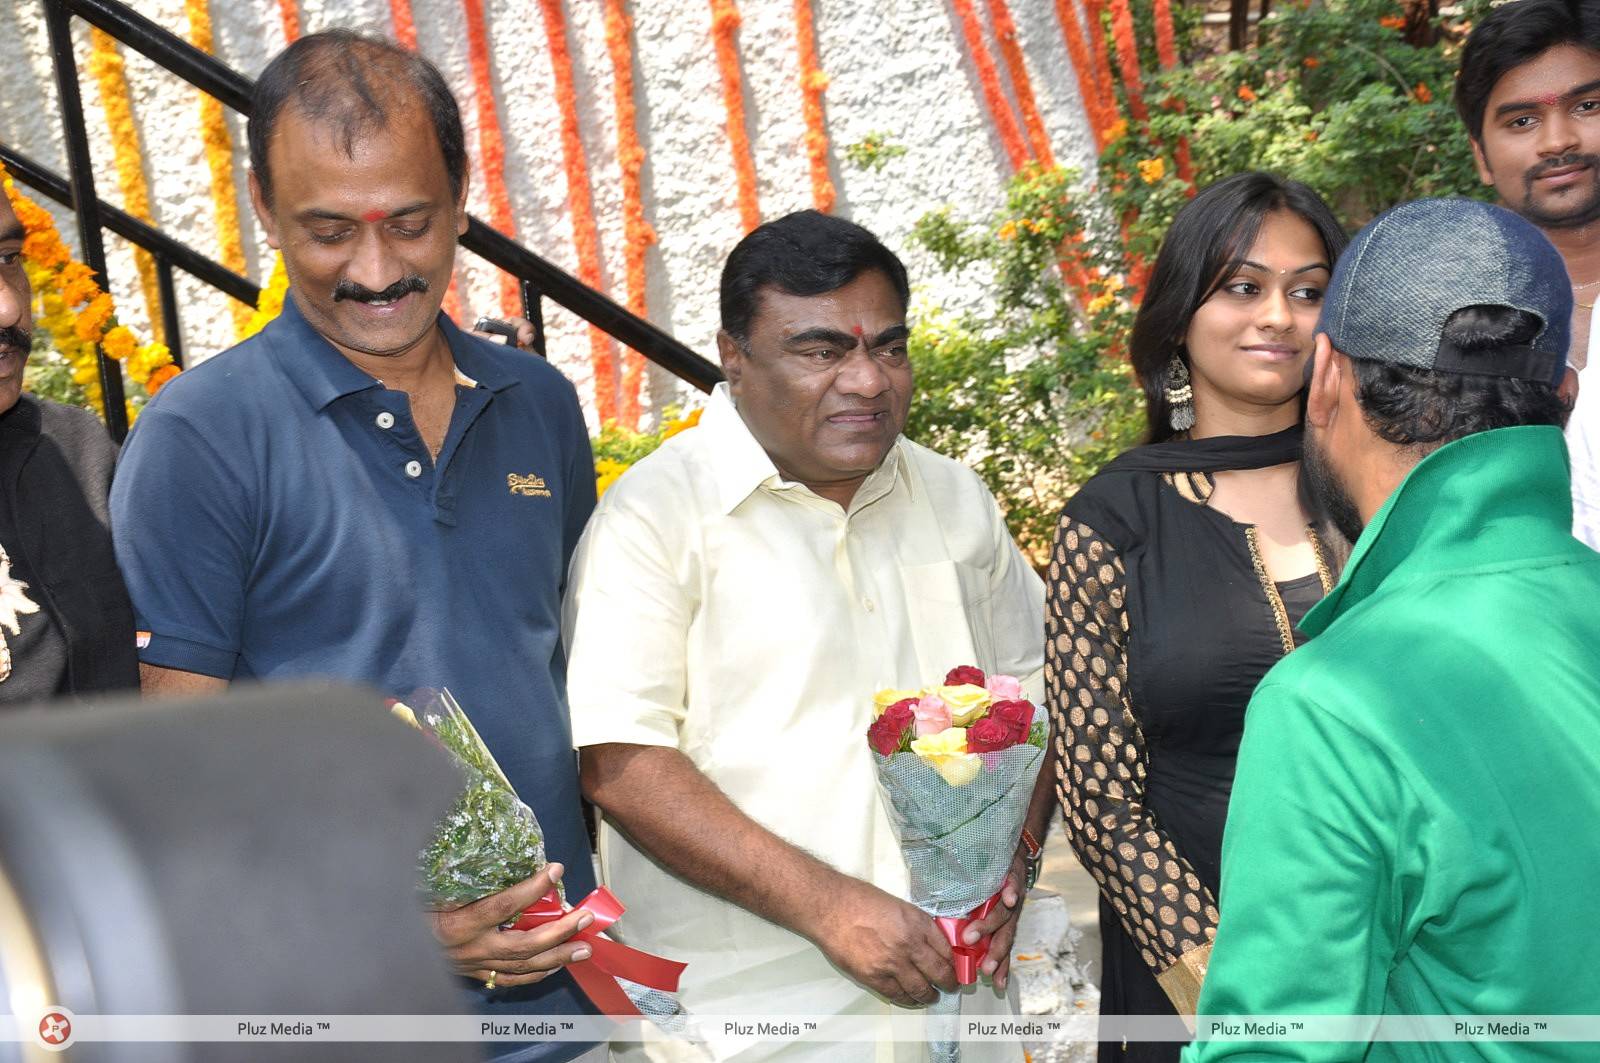 Jananam Movie Opening Photos | Picture 429187